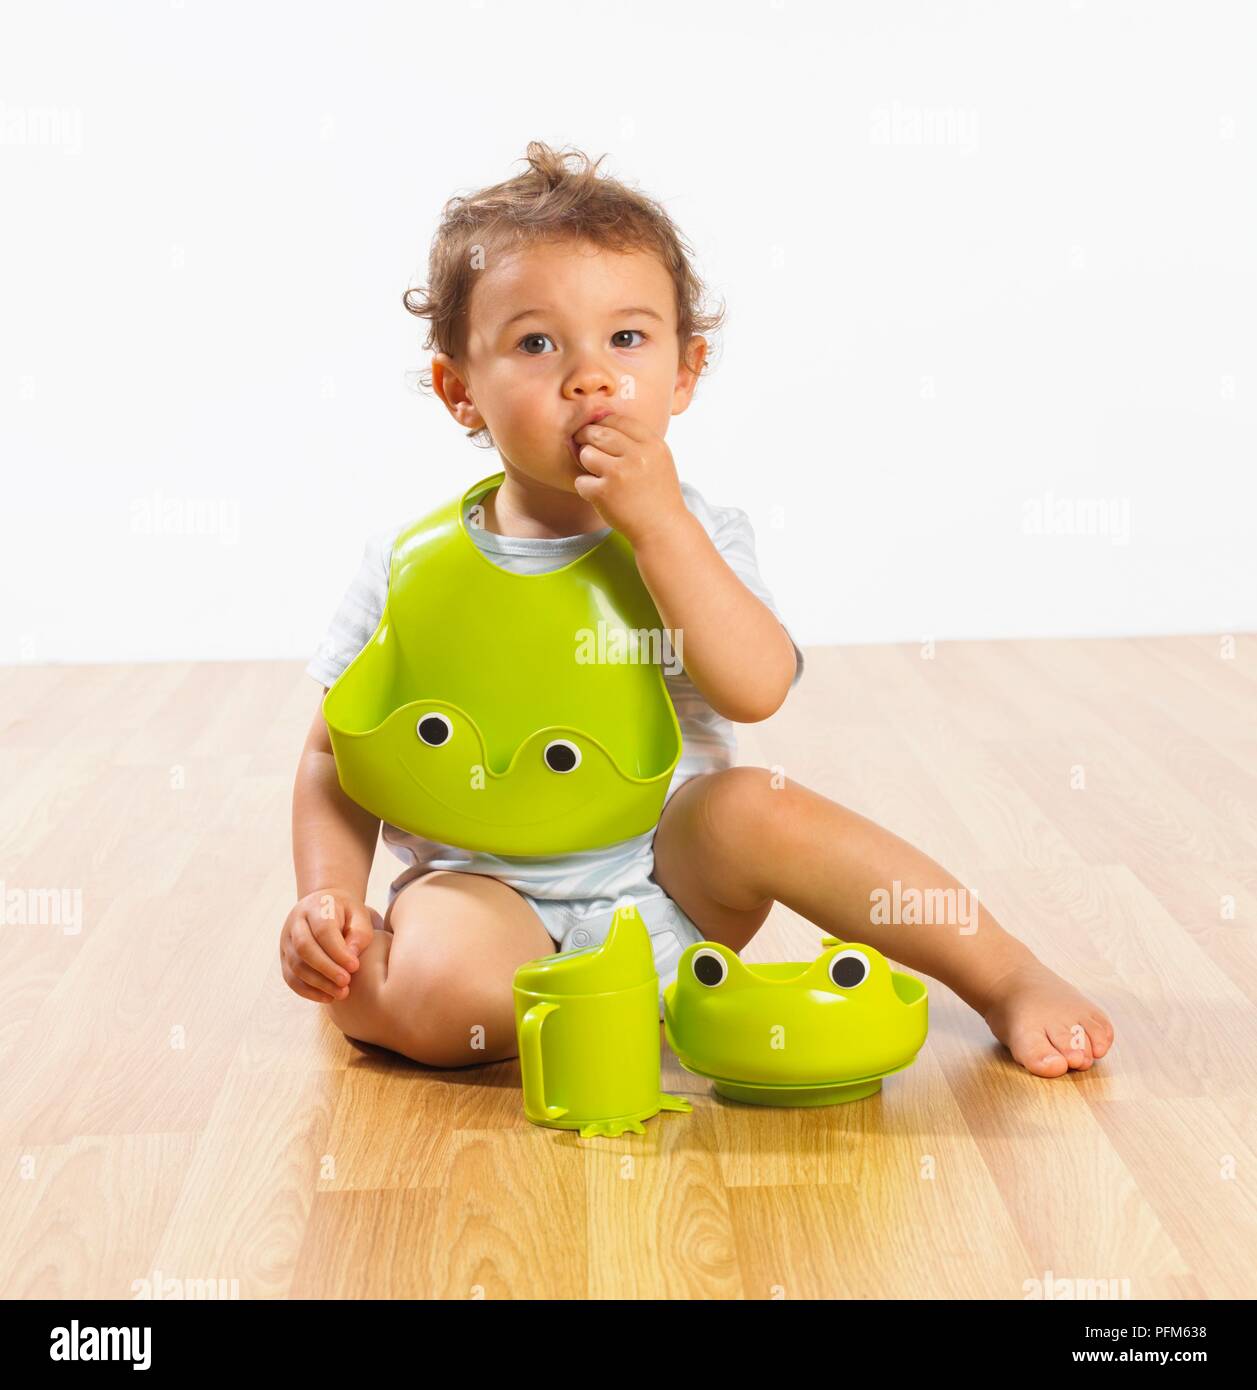 Baby boy with green plastic bib around neck eating with his hand, plastic bowl and mug with spout in front Stock Photo